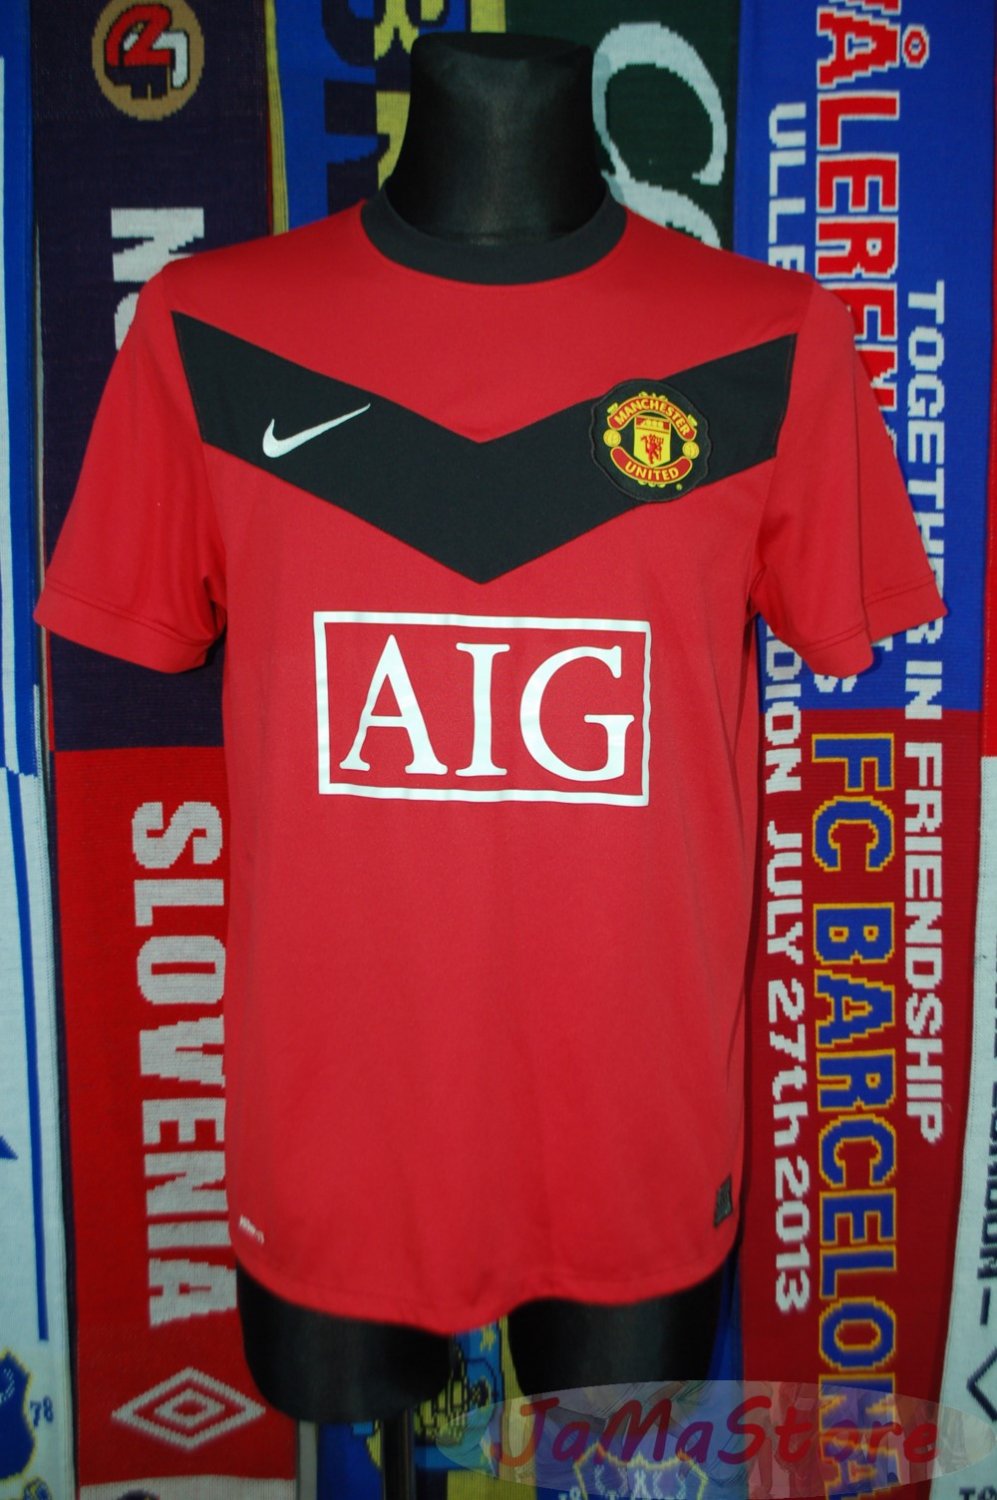 Manchester United Home football shirt 2009 - 2010. Sponsored by AIG